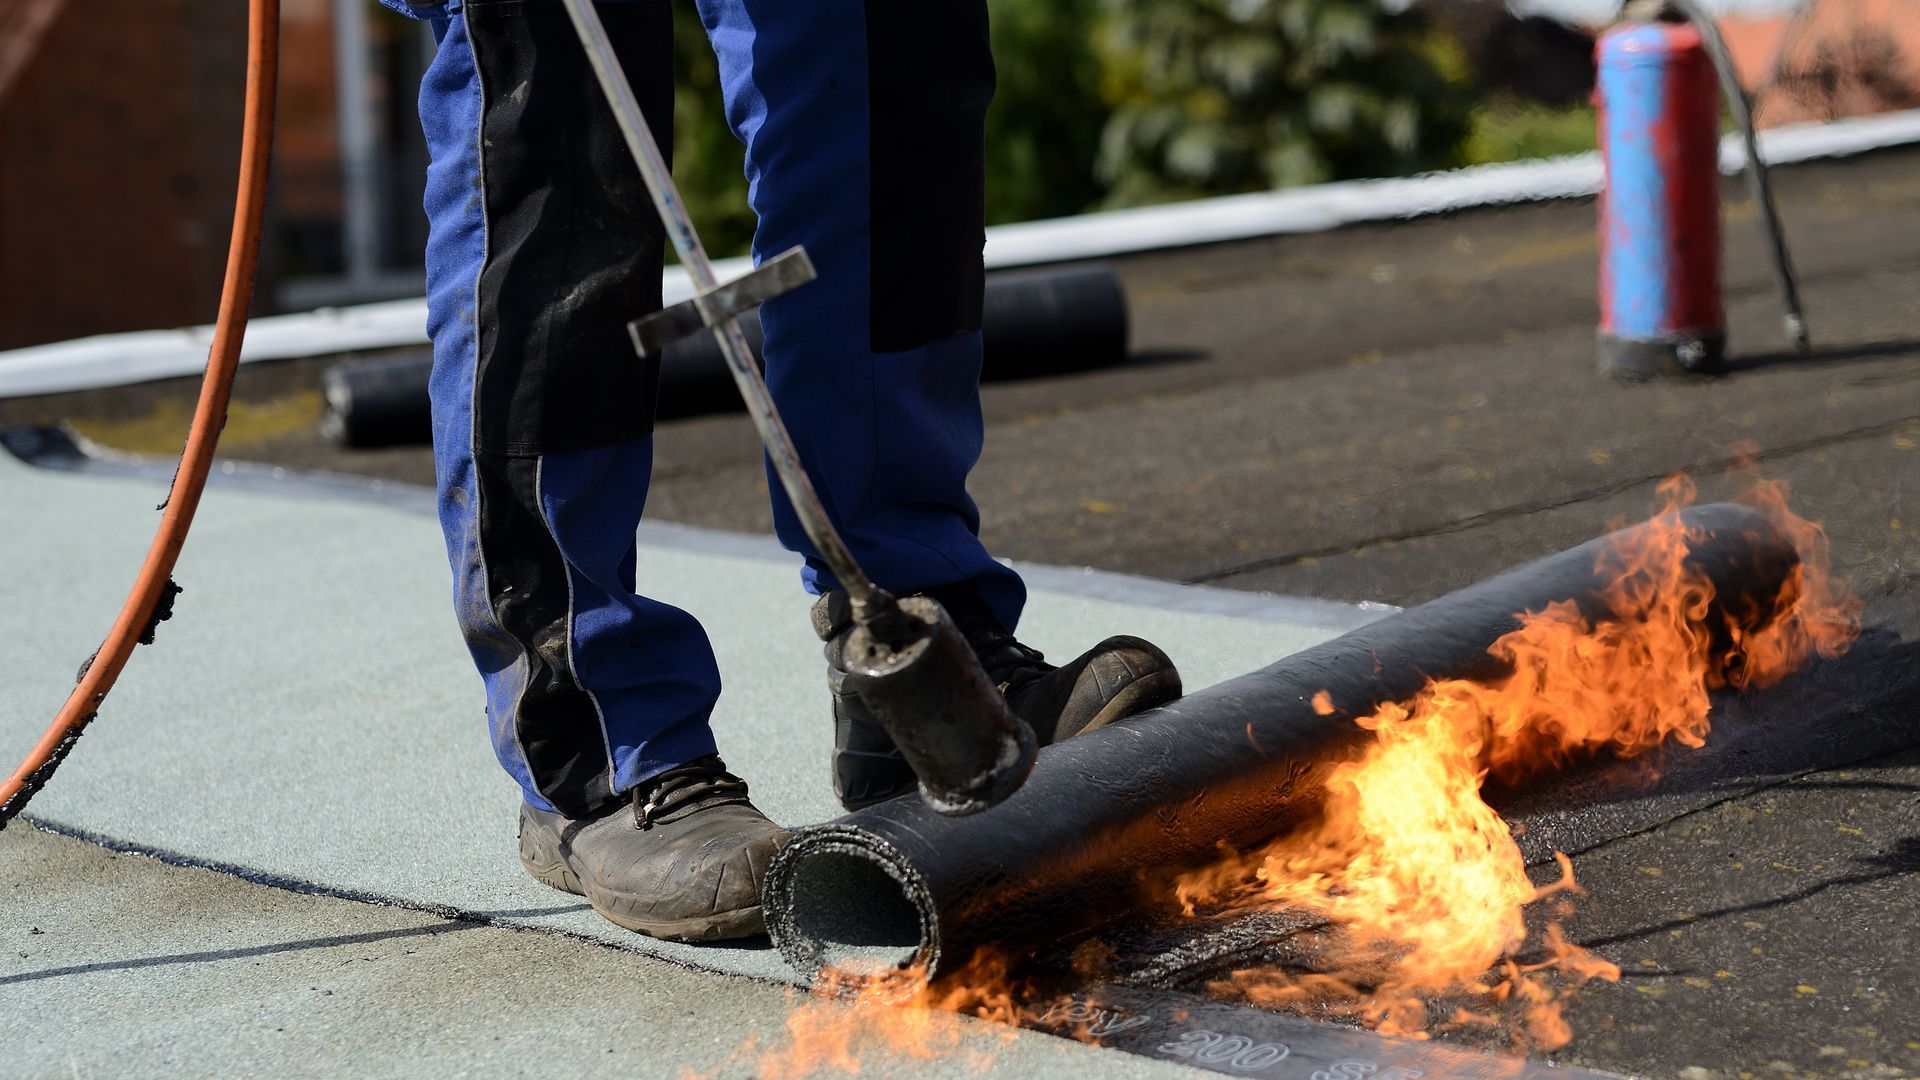 A man is using a torch to burn a roll of roofing material on a roof.